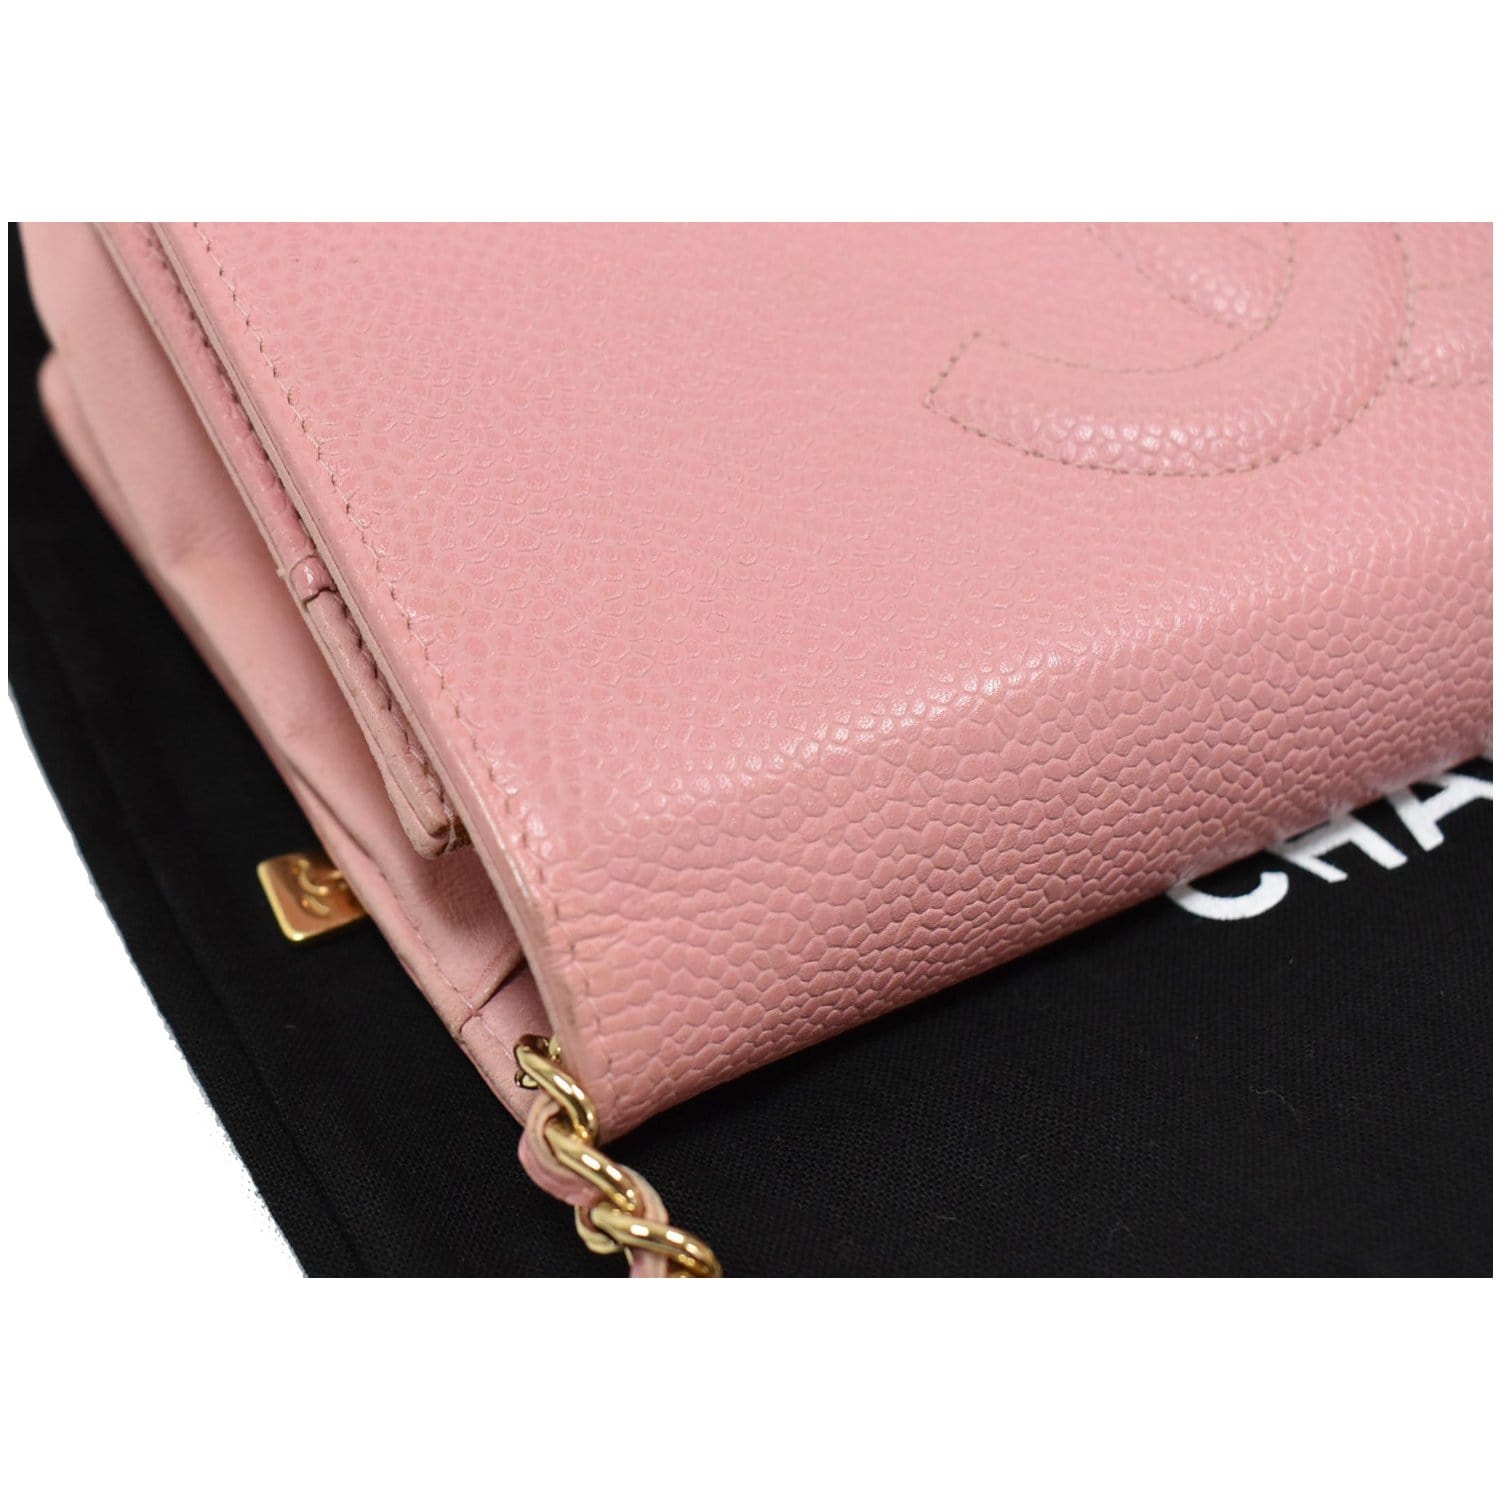 Timeless/classique leather key ring Chanel Pink in Leather - 27587770